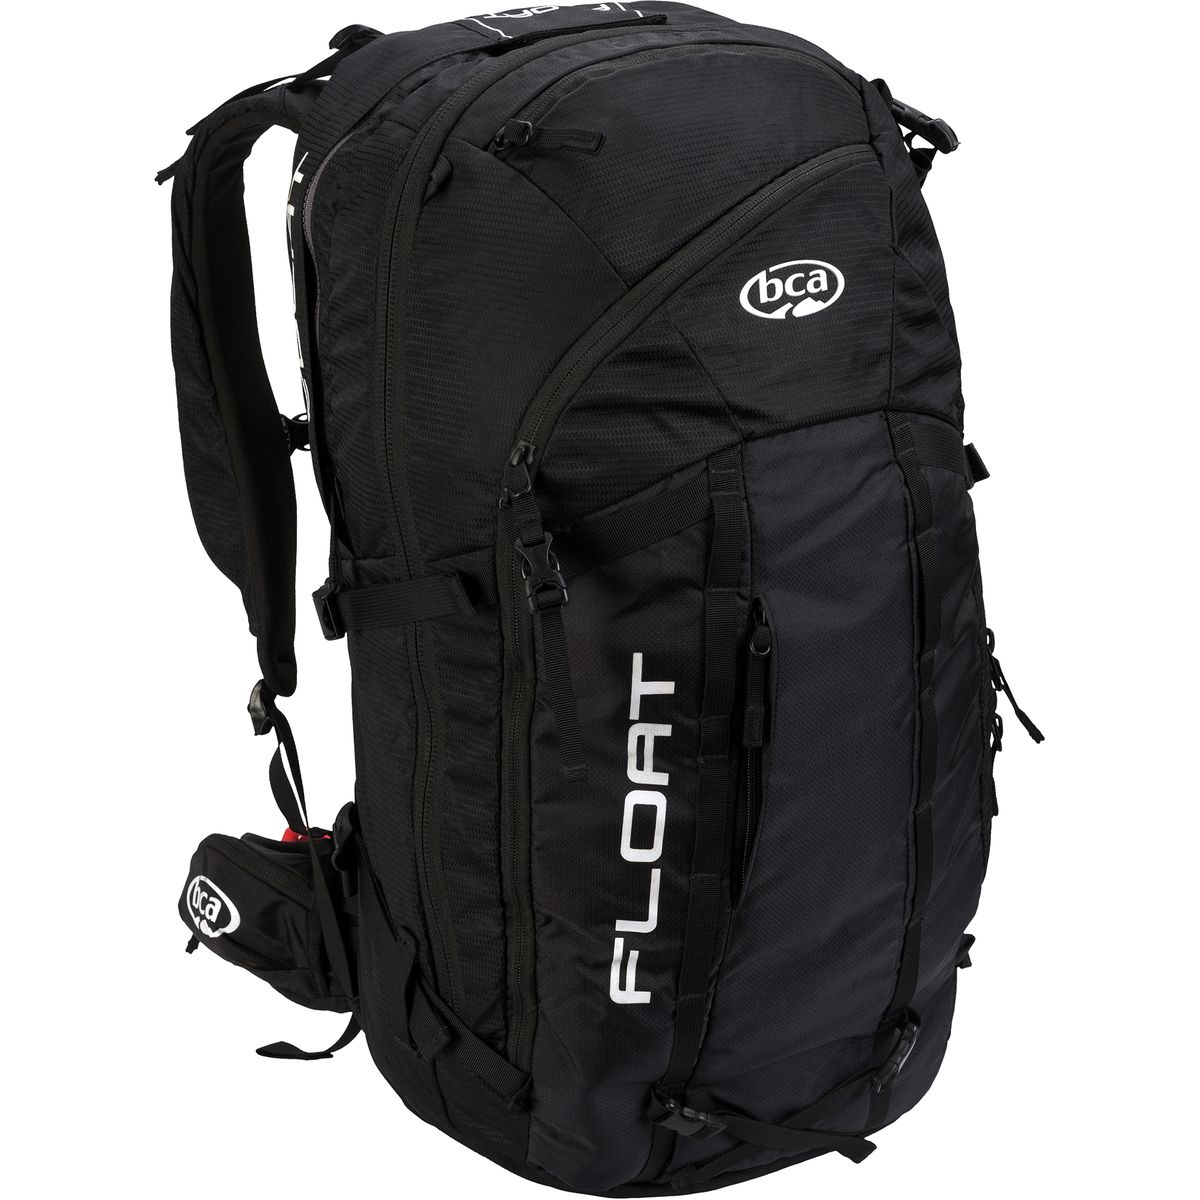 Backcountry Access Float 42 Airbag Backpack - 2560cu in